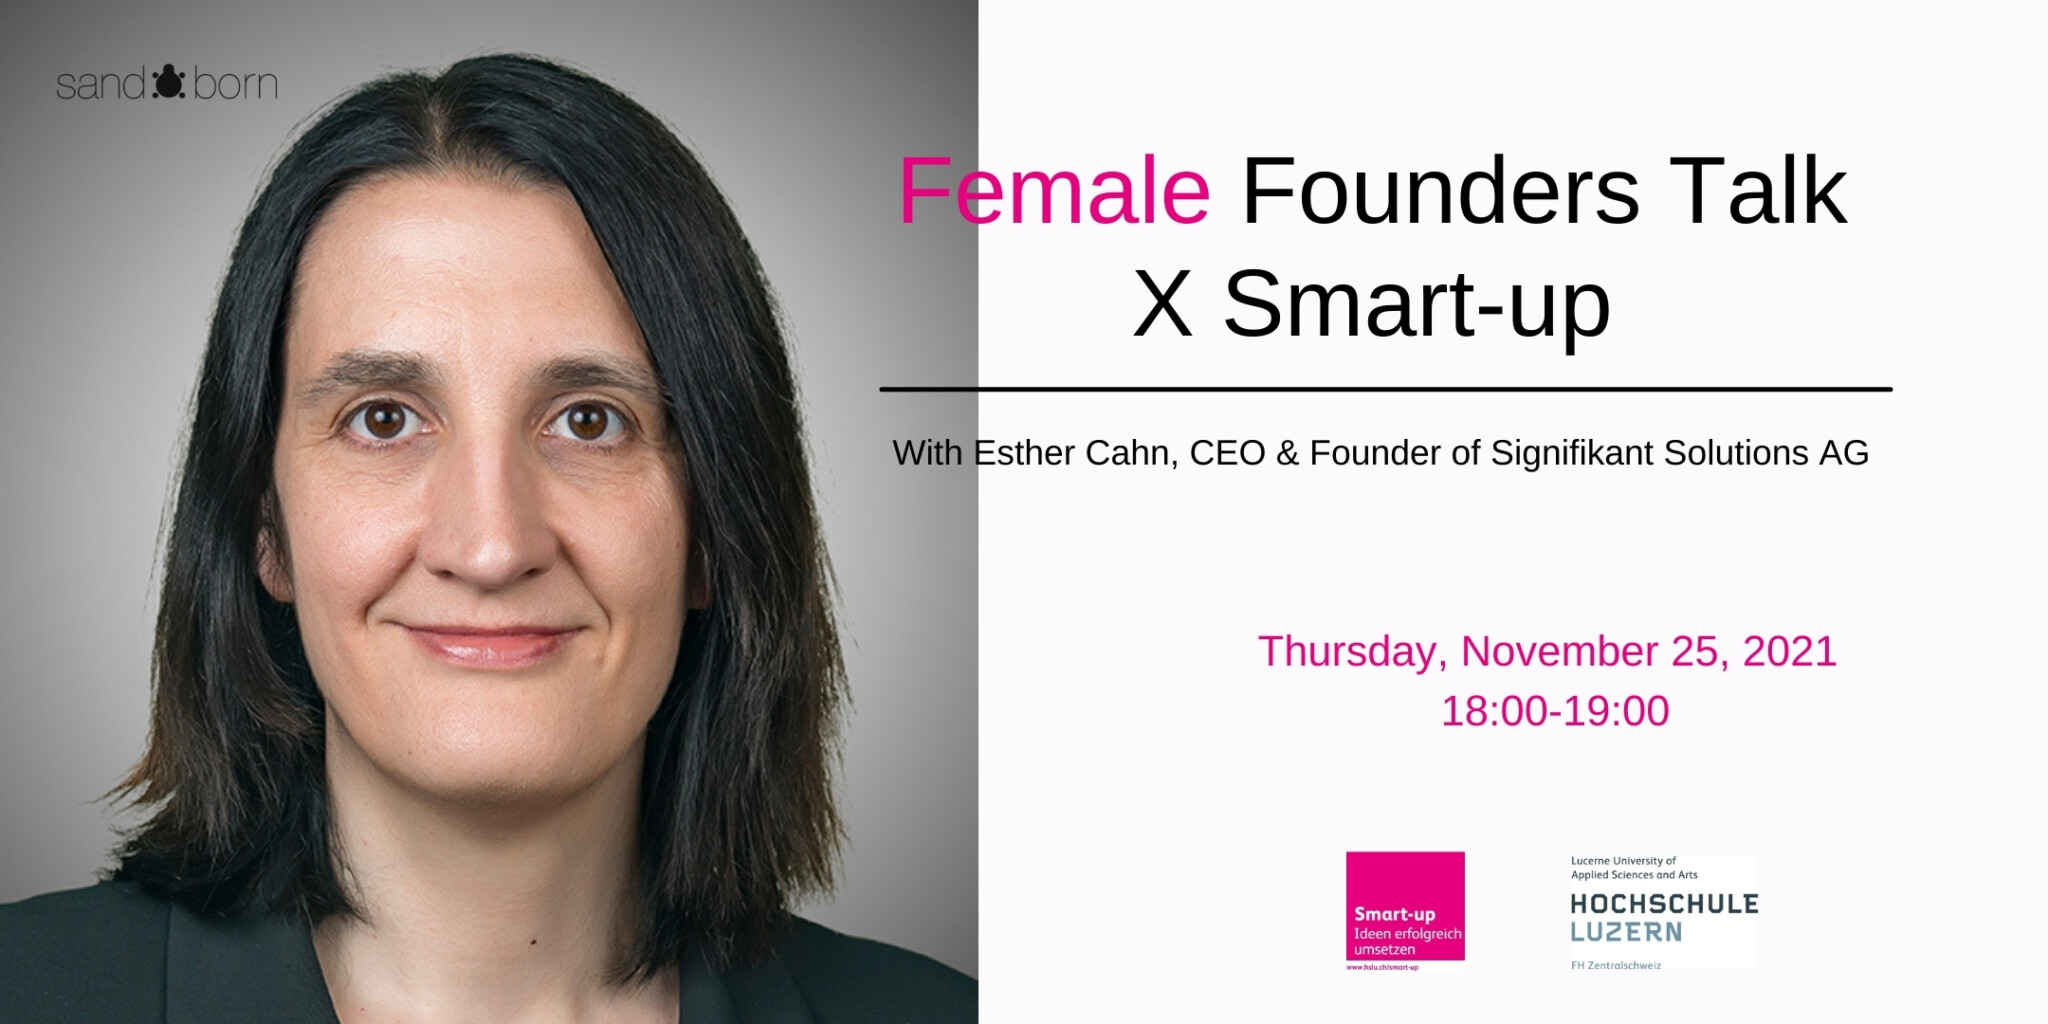 Female Founders Talk X Smart-up with Esther Cahn from Signifikant